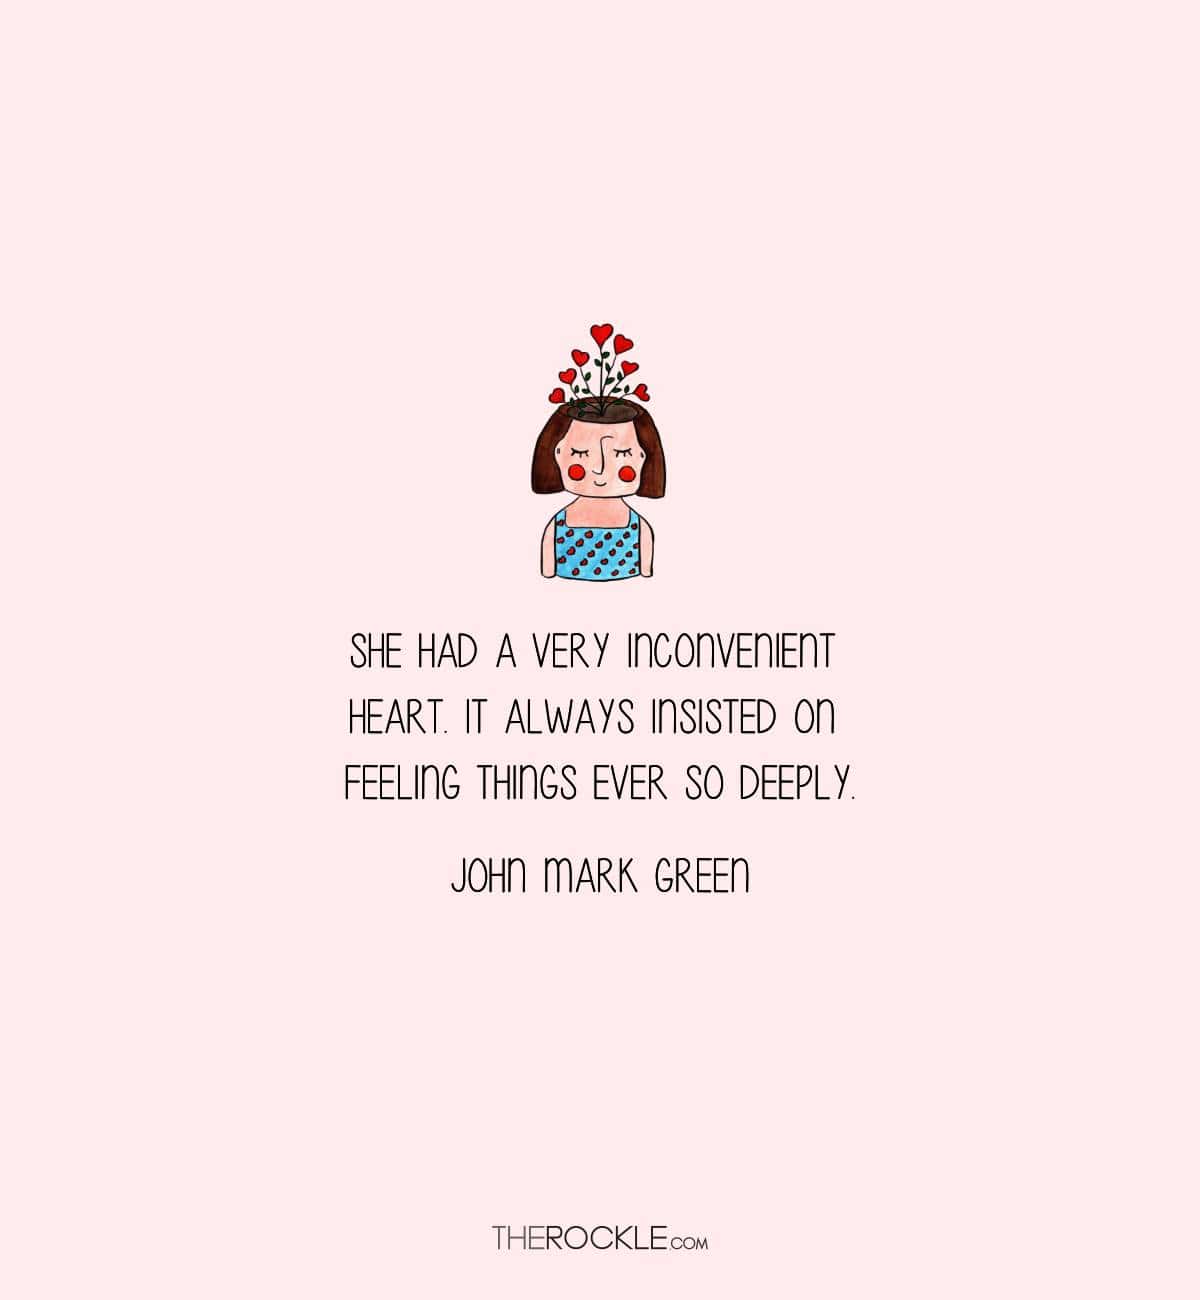 John Mark Green quote on feeling everything deeply